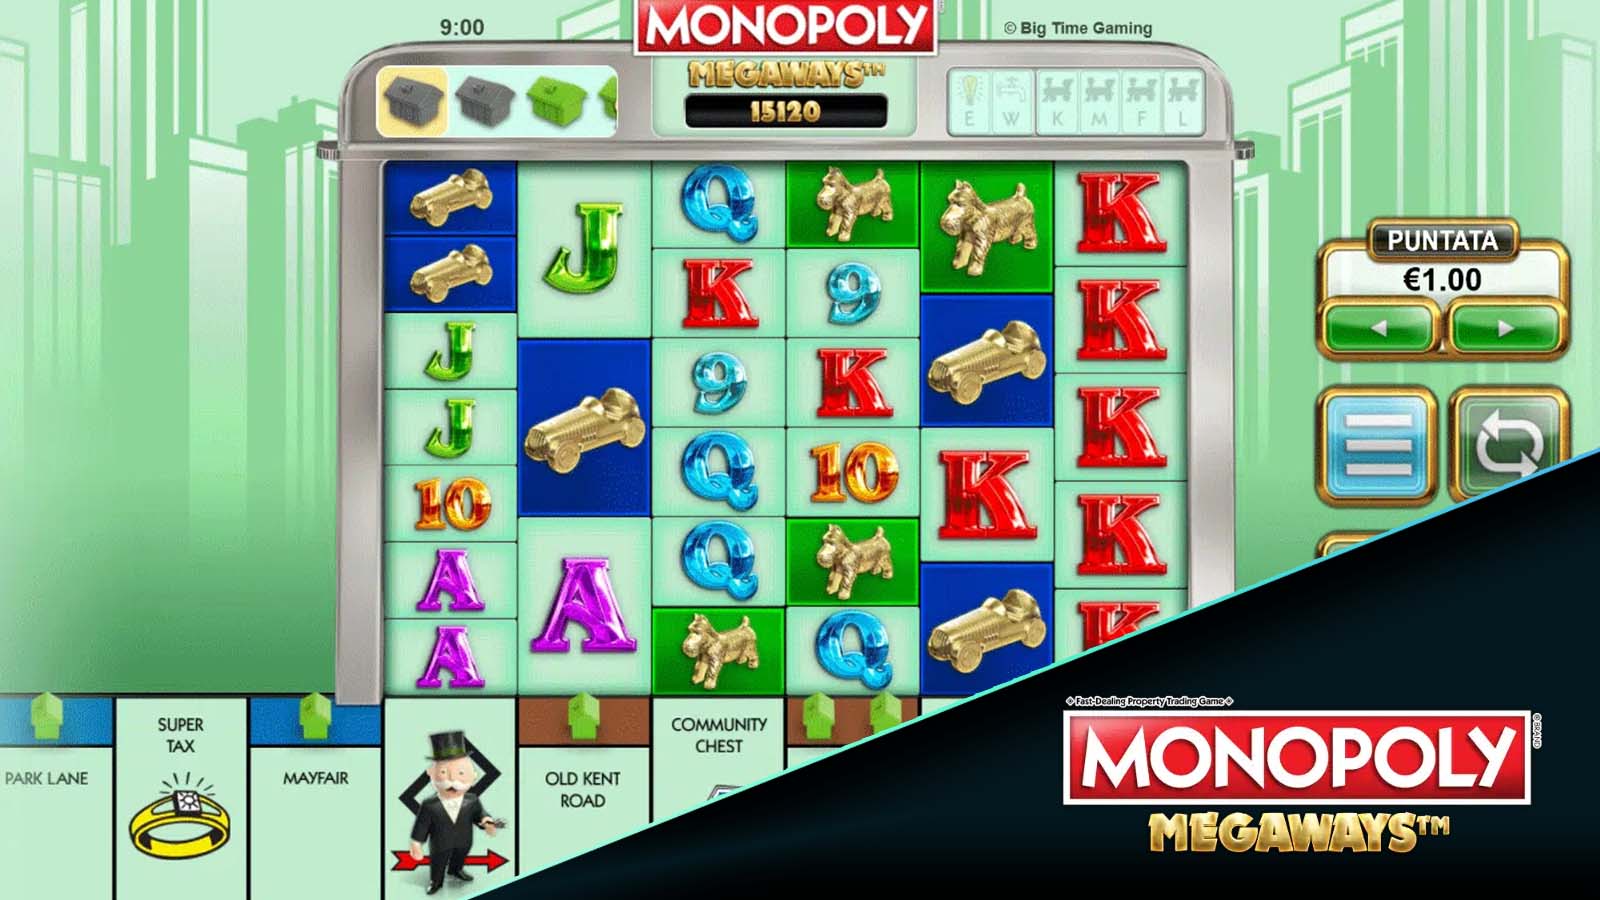 Monopoly Megaways The Best Online Pokies You Can Find in Land-Based Casinos